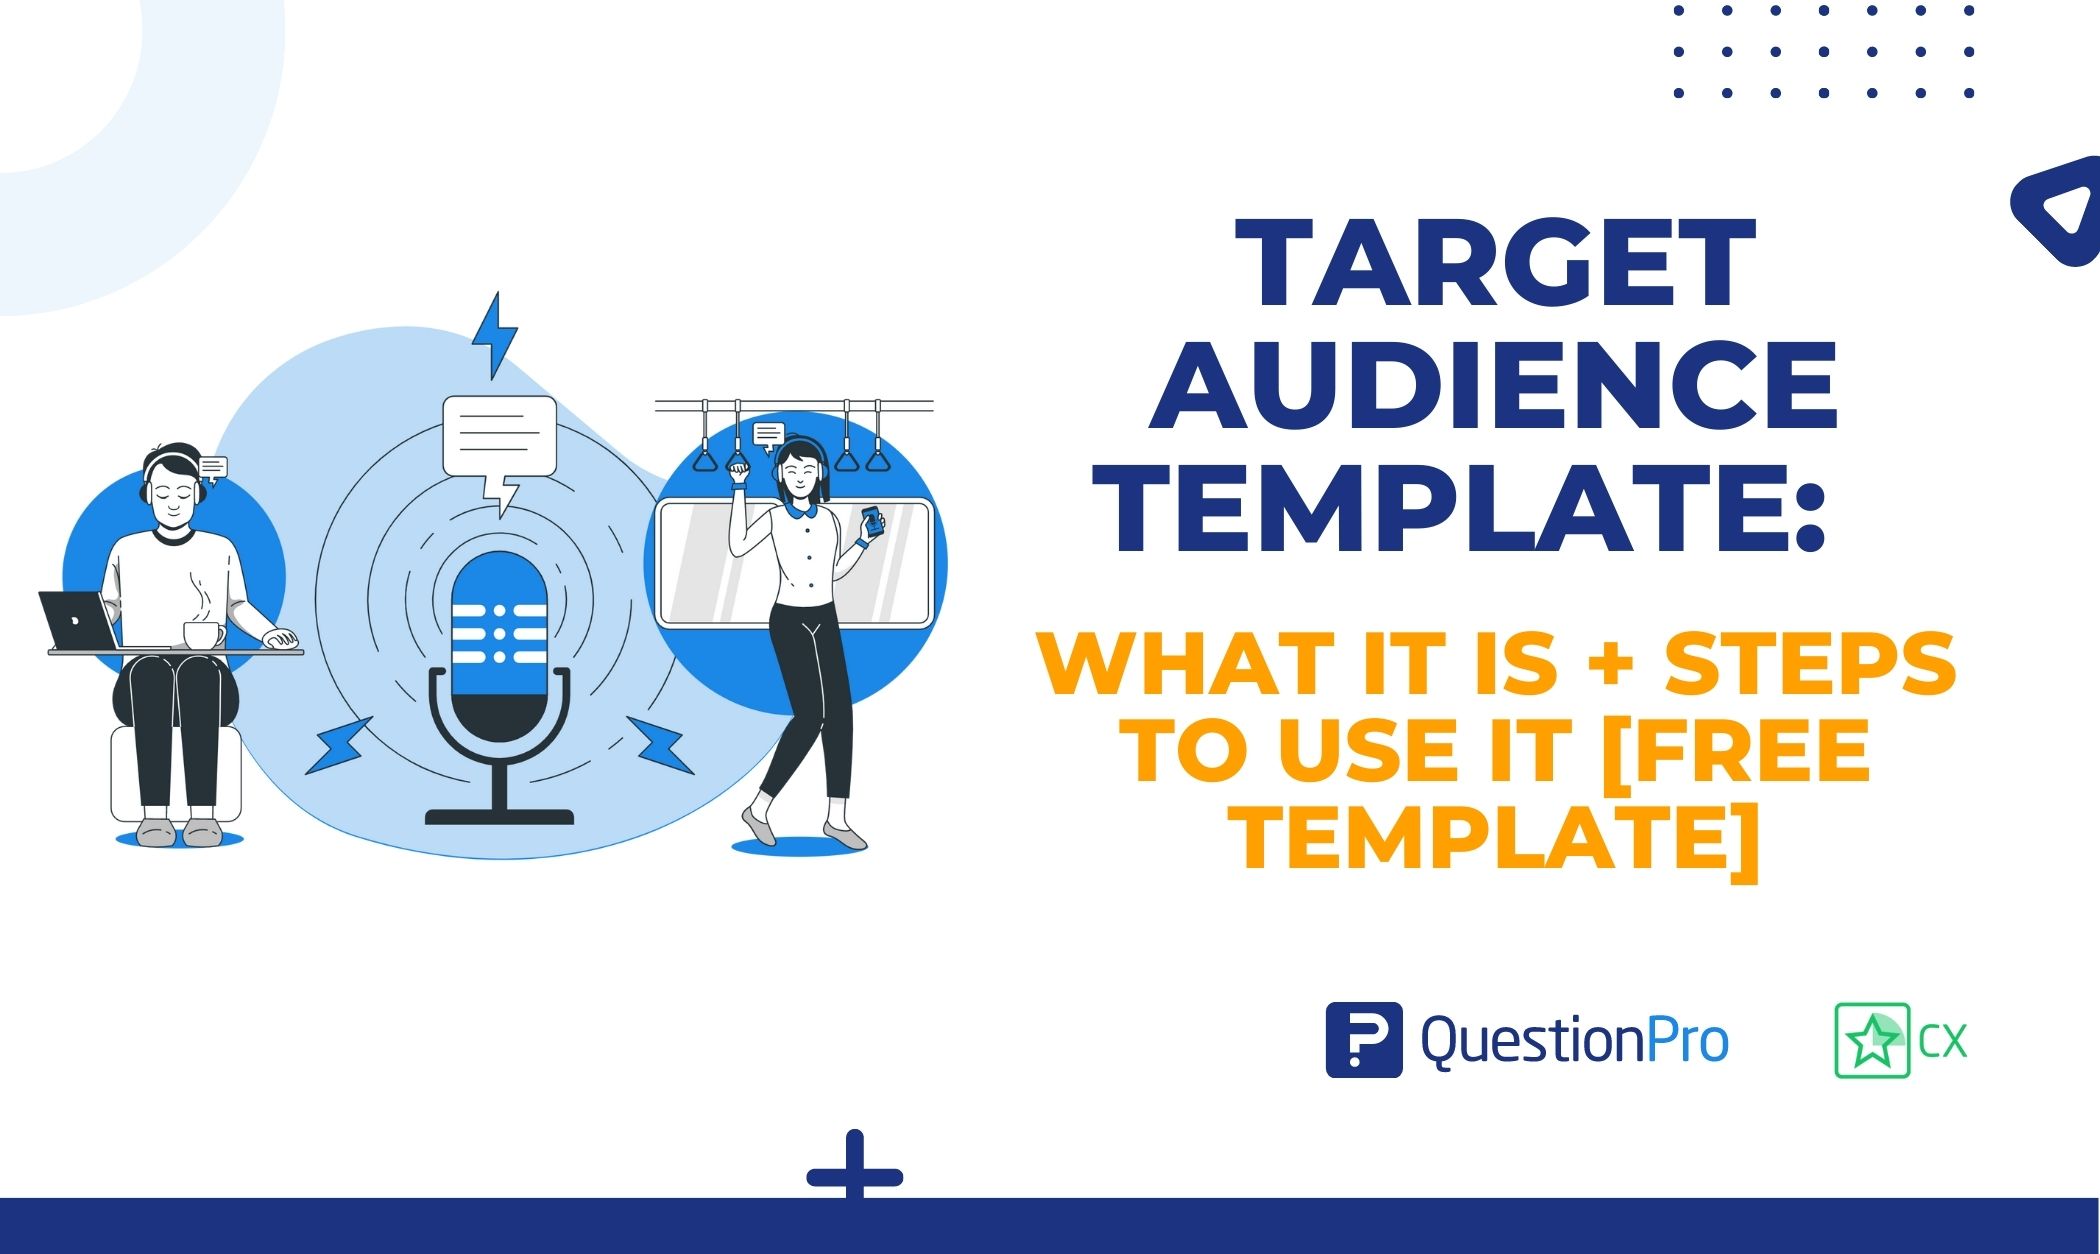 The target audience template assists you in better understanding your target customers. Add information about your audience using the fields.